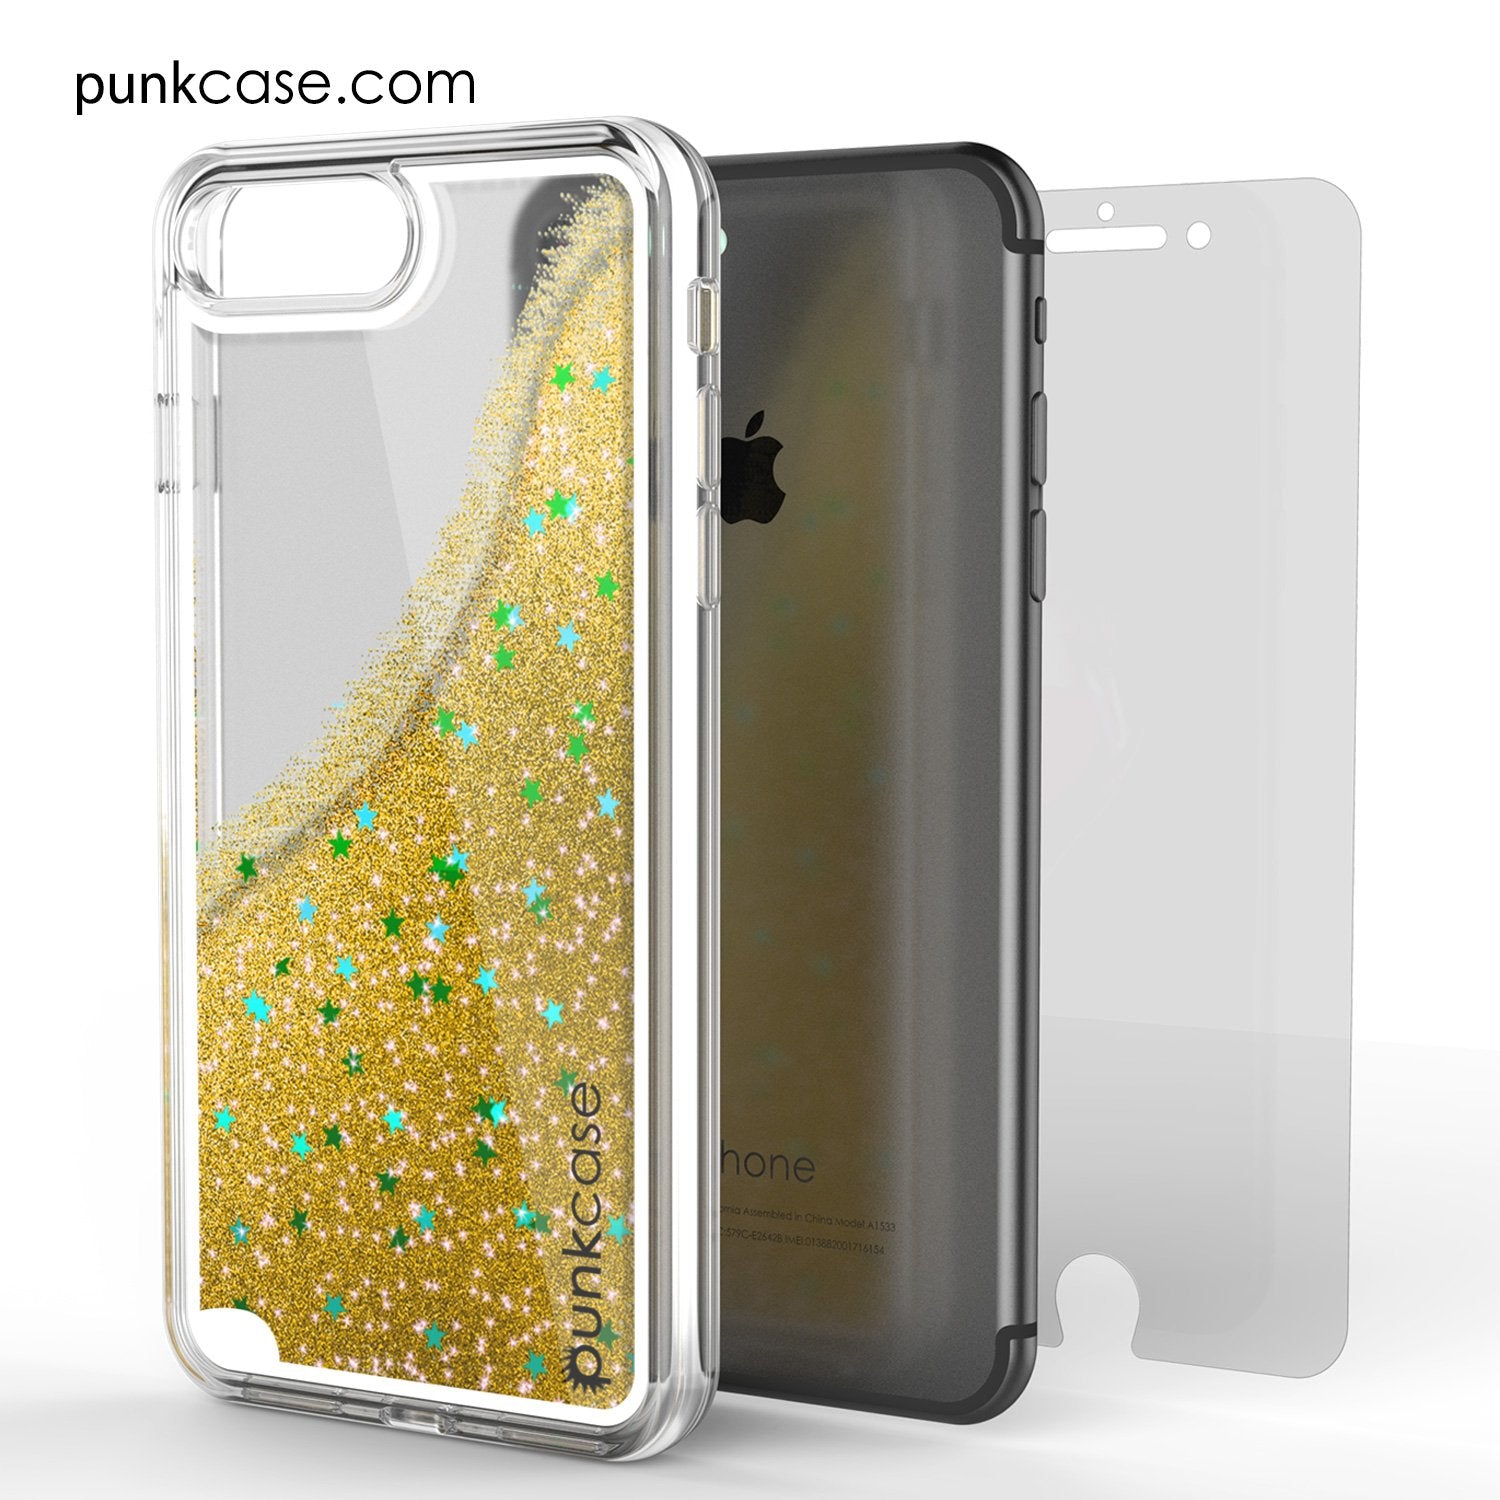 iPhone 7+Plus Case, PunkСase LIQUID Gold Series, Protective Dual Layer Floating Glitter Cover - PunkCase NZ